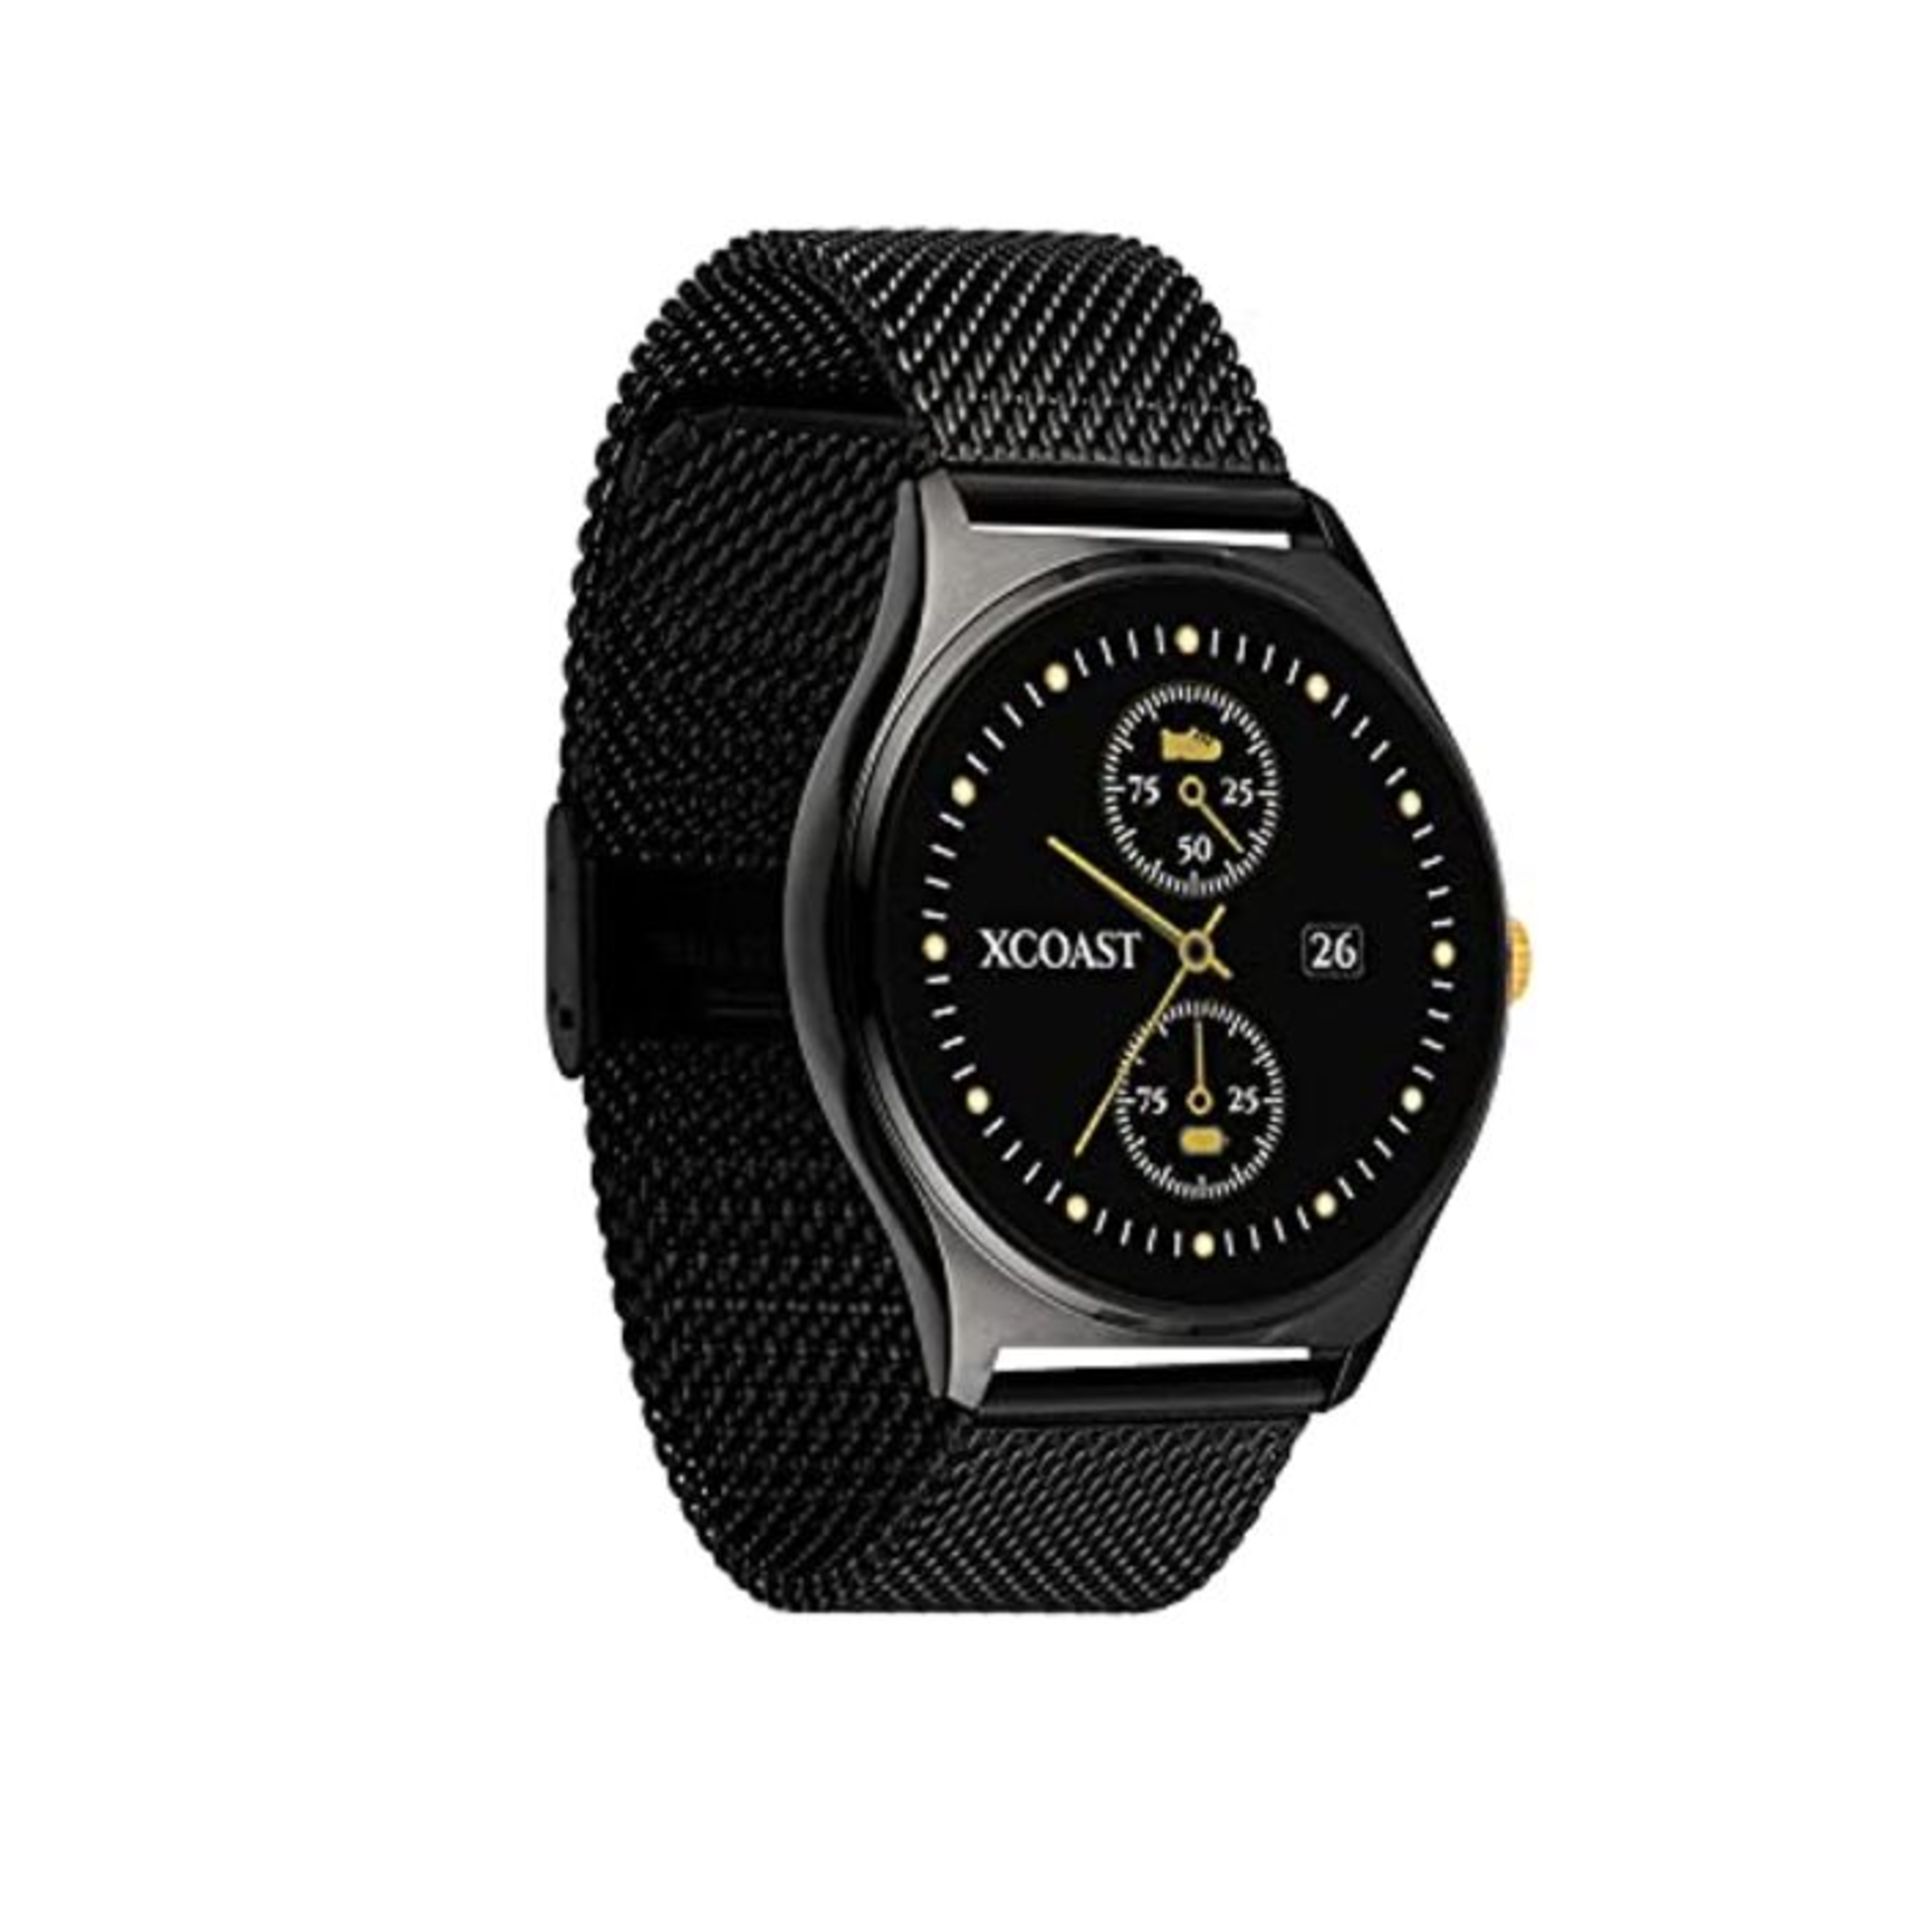 RRP £54.00 X-WATCH Qin XW PRO Dark Mesh-XCOAST Edition iOS & Android-Full Touch Smartwatch, Step